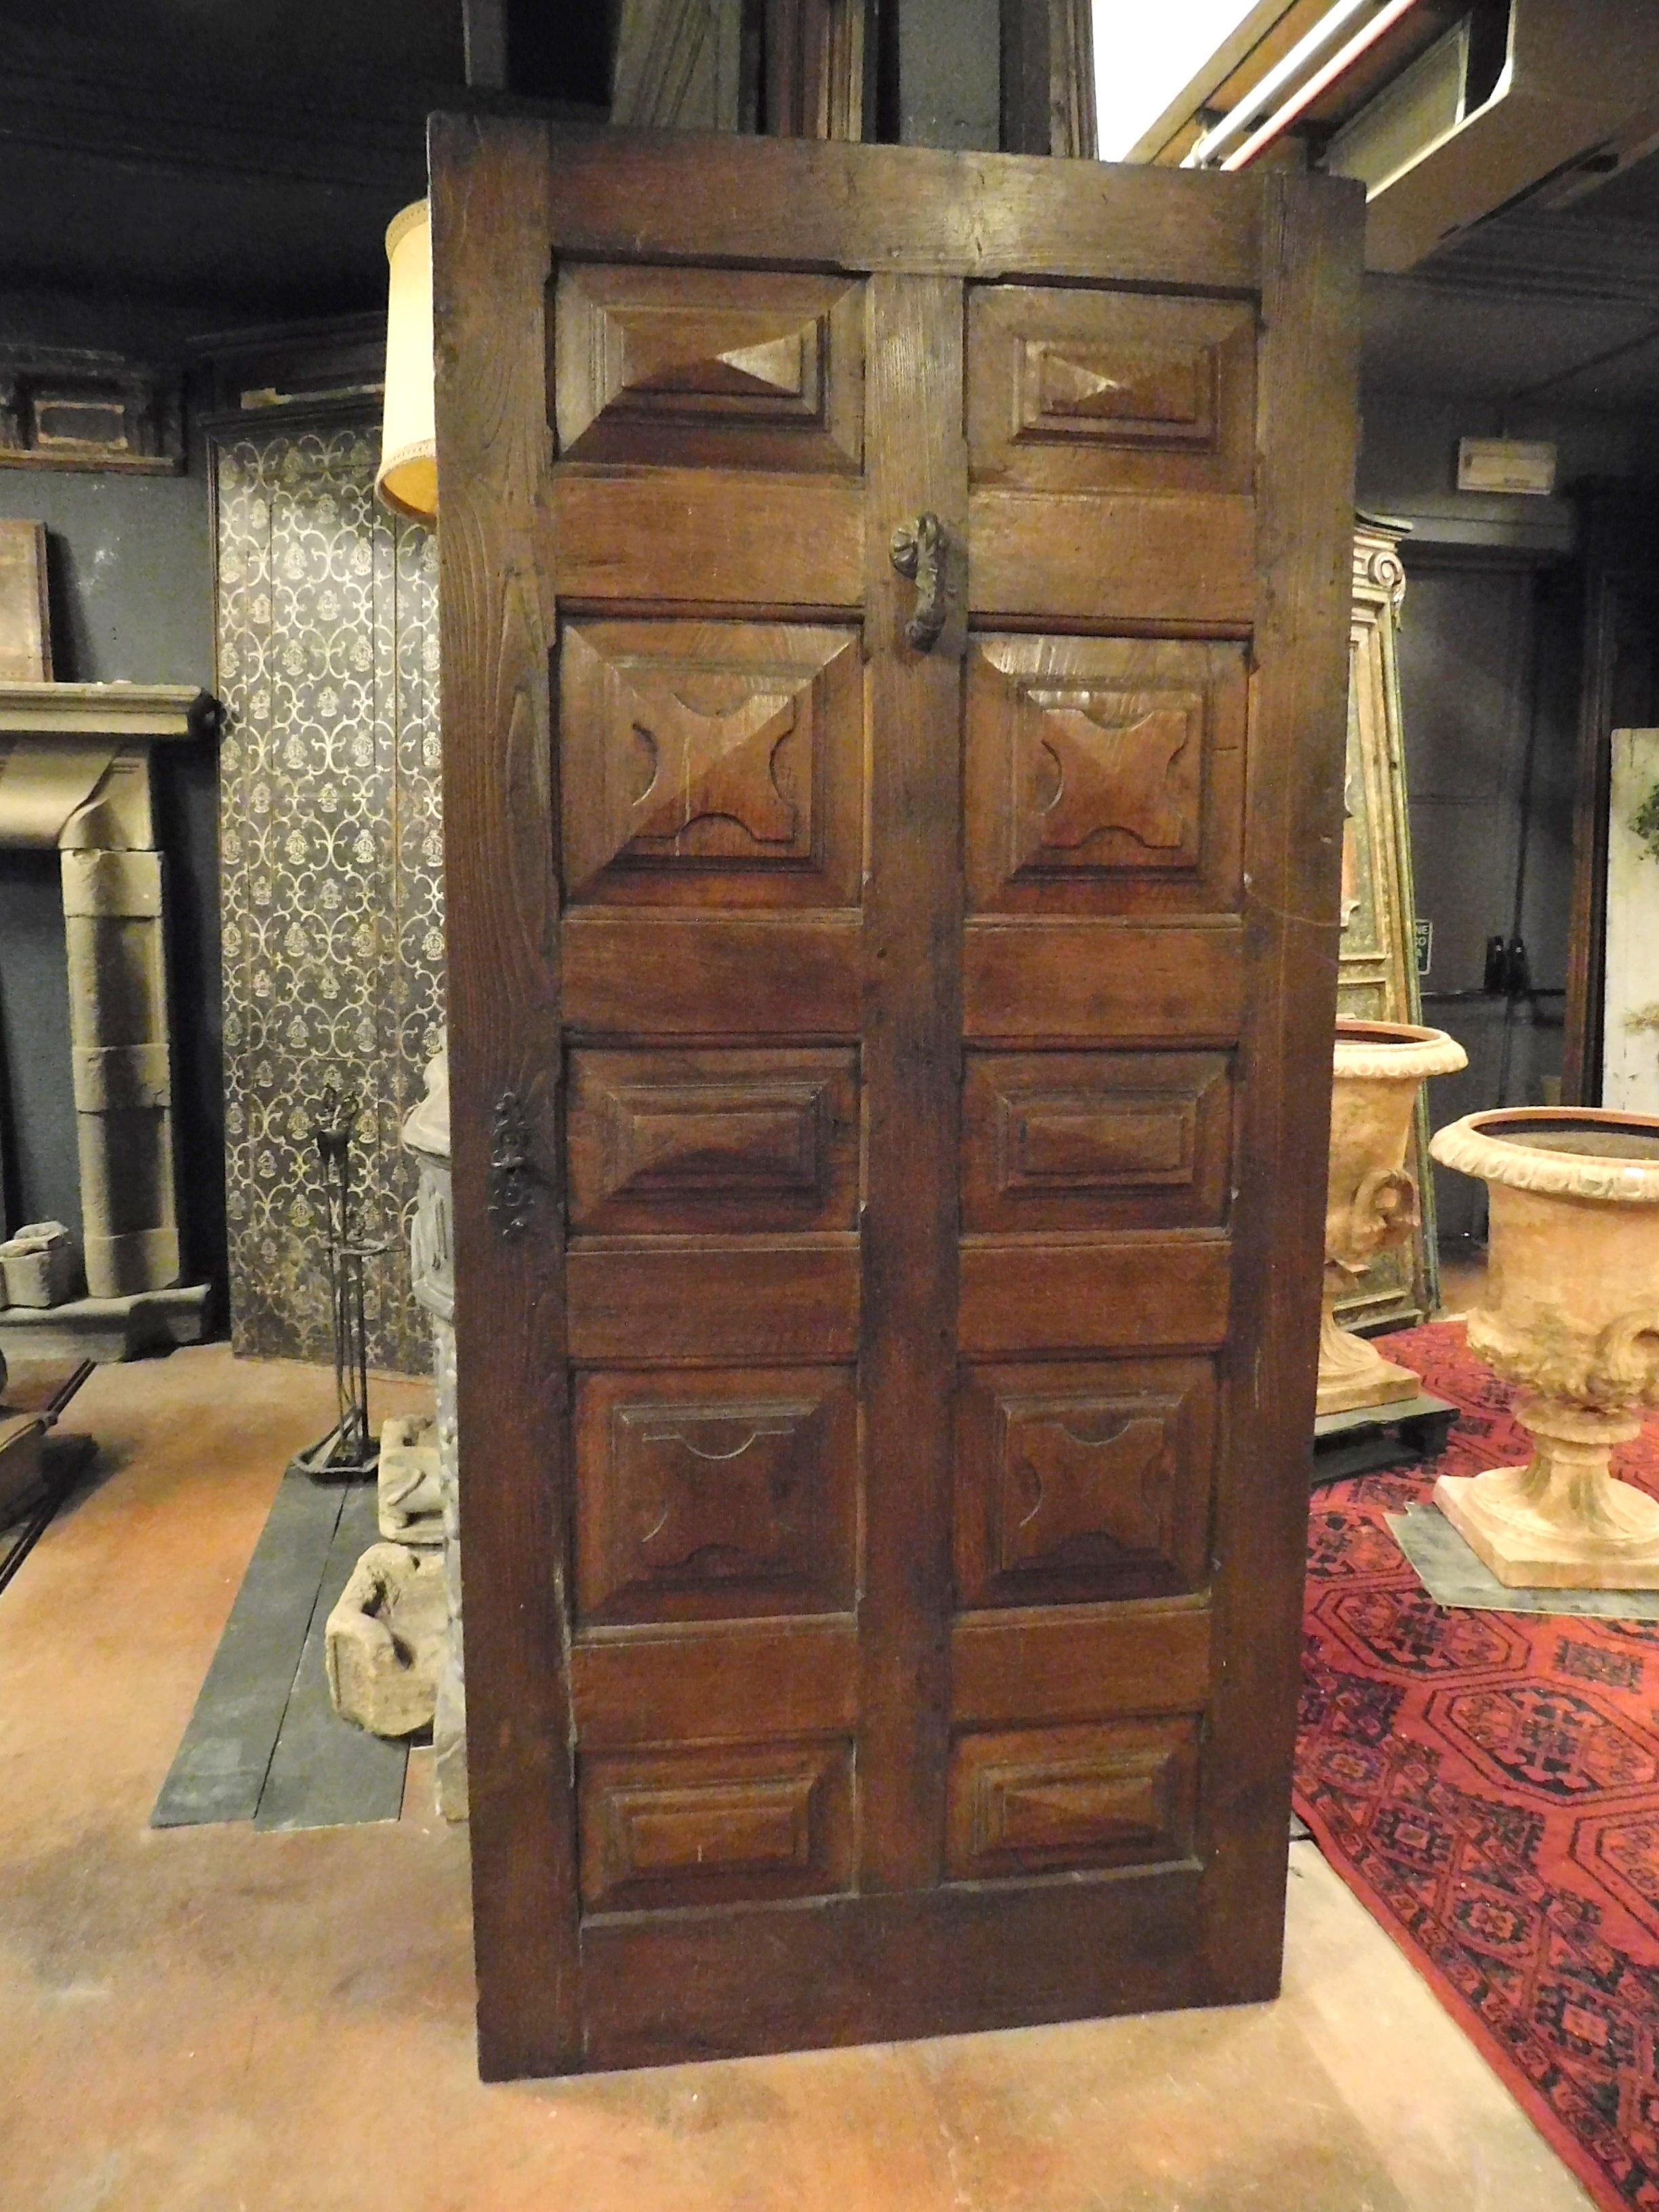 Antique door in precious solid walnut wood, with many hand-carved panels with a jutting diamond shape, built entirely by hand in the 17th century for an important building in Italy,
Very fascinating, it retains the patina of the centuries that made